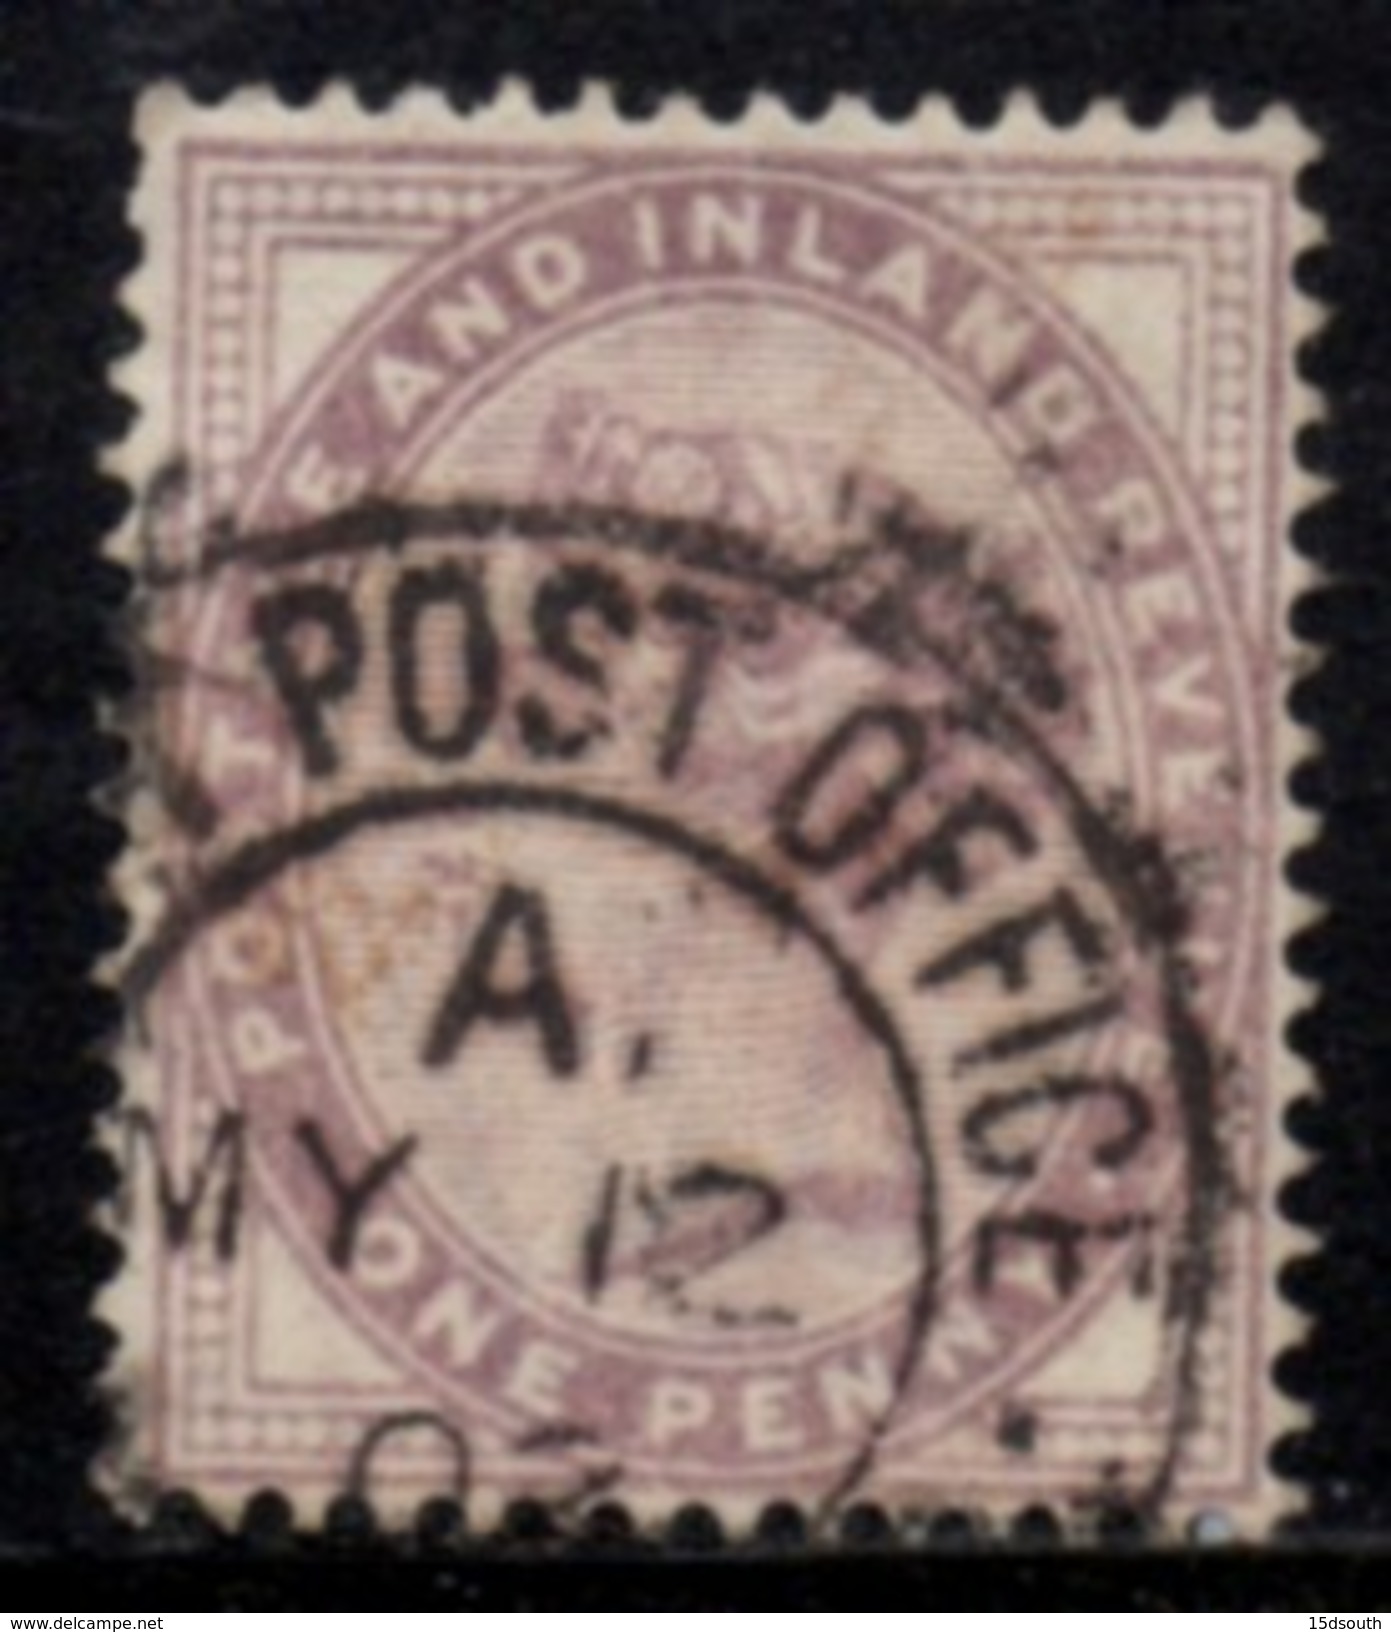 South Africa British Army Field Post Office - 1902 1d (o) # SG Z1 - Unclassified